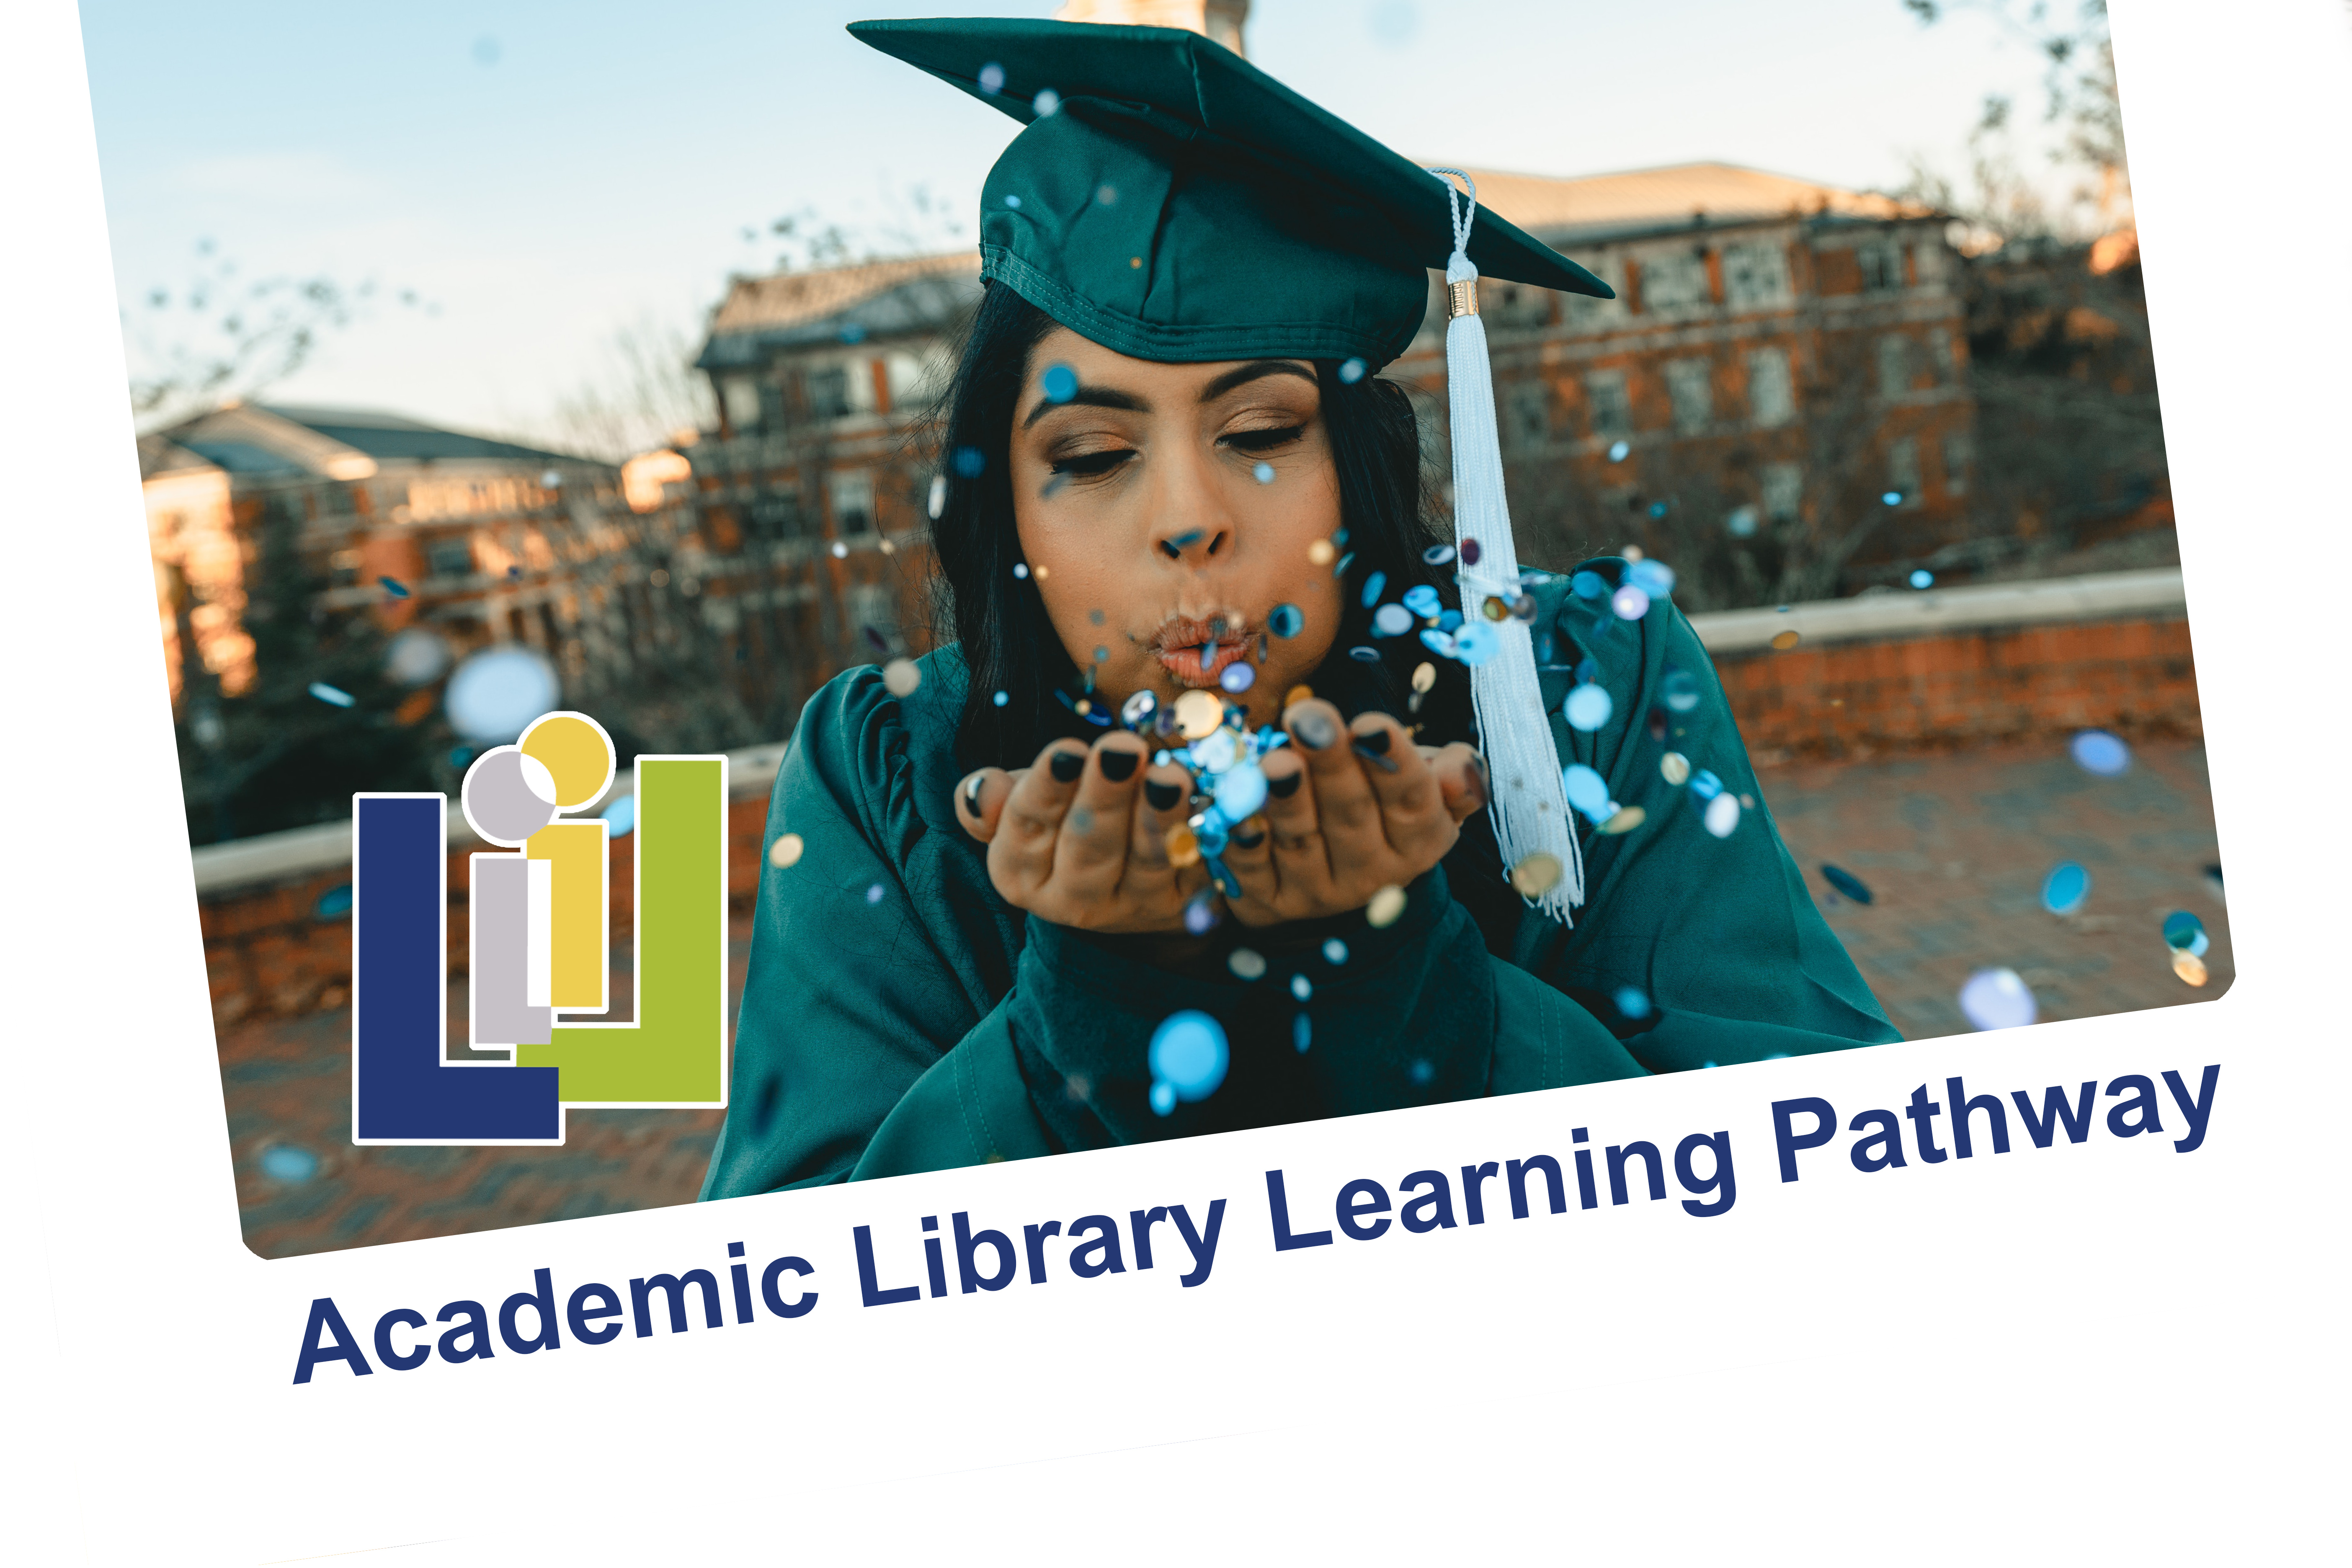 A student celebrates graduation by blowing confetti toward the camera while wearing their cap and gown. The text Academic Library Learning Pathway is displayed alongside the LibraryLinkNJ logo.